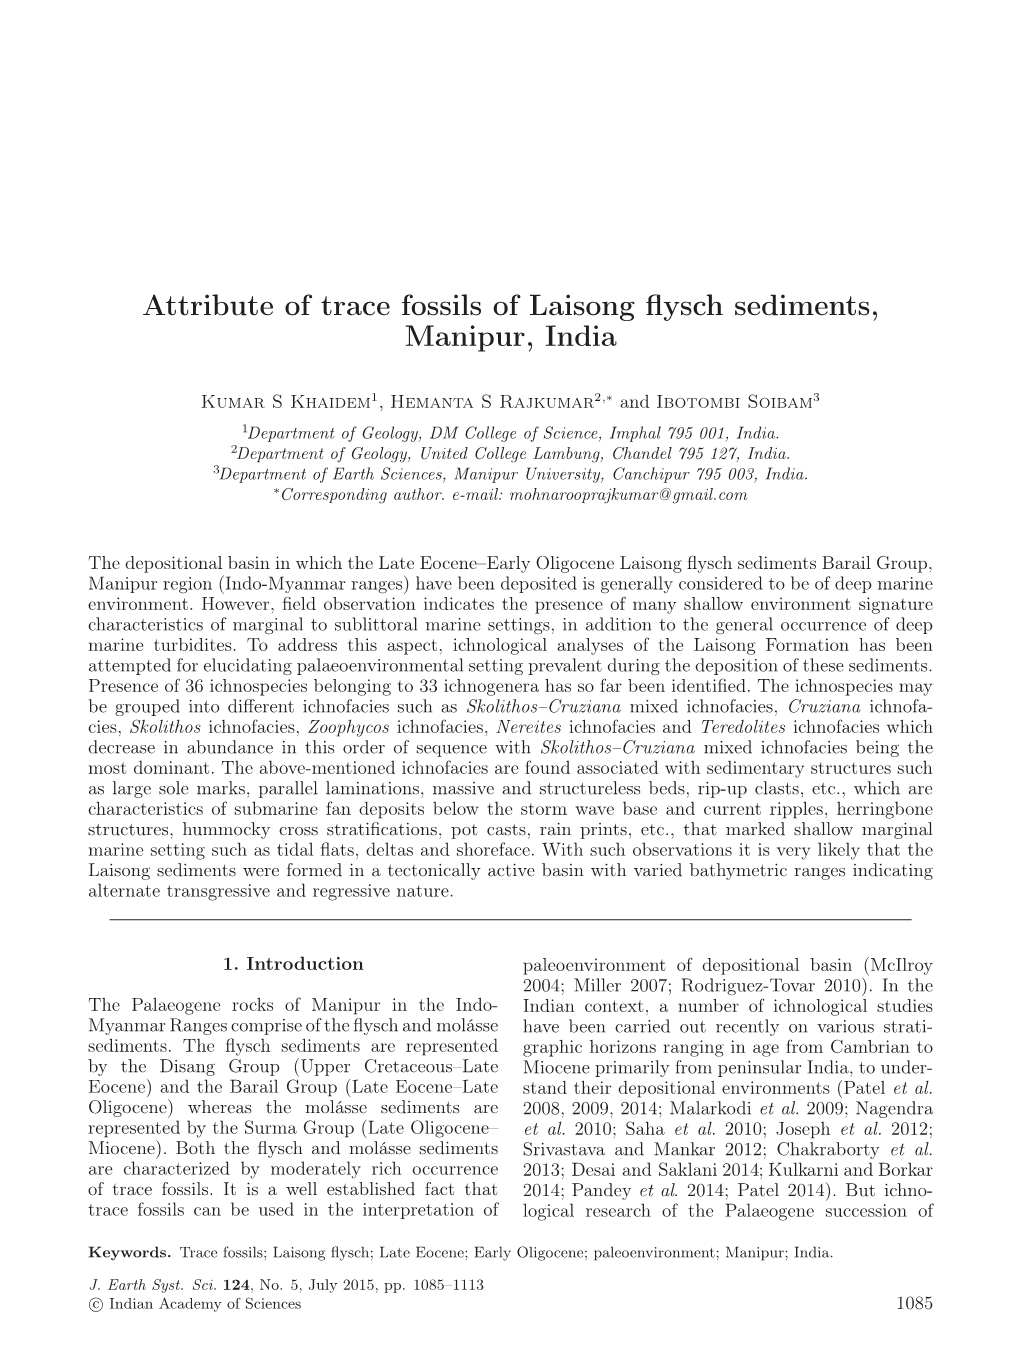 Attribute of Trace Fossils of Laisong Flysch Sediments, Manipur, India